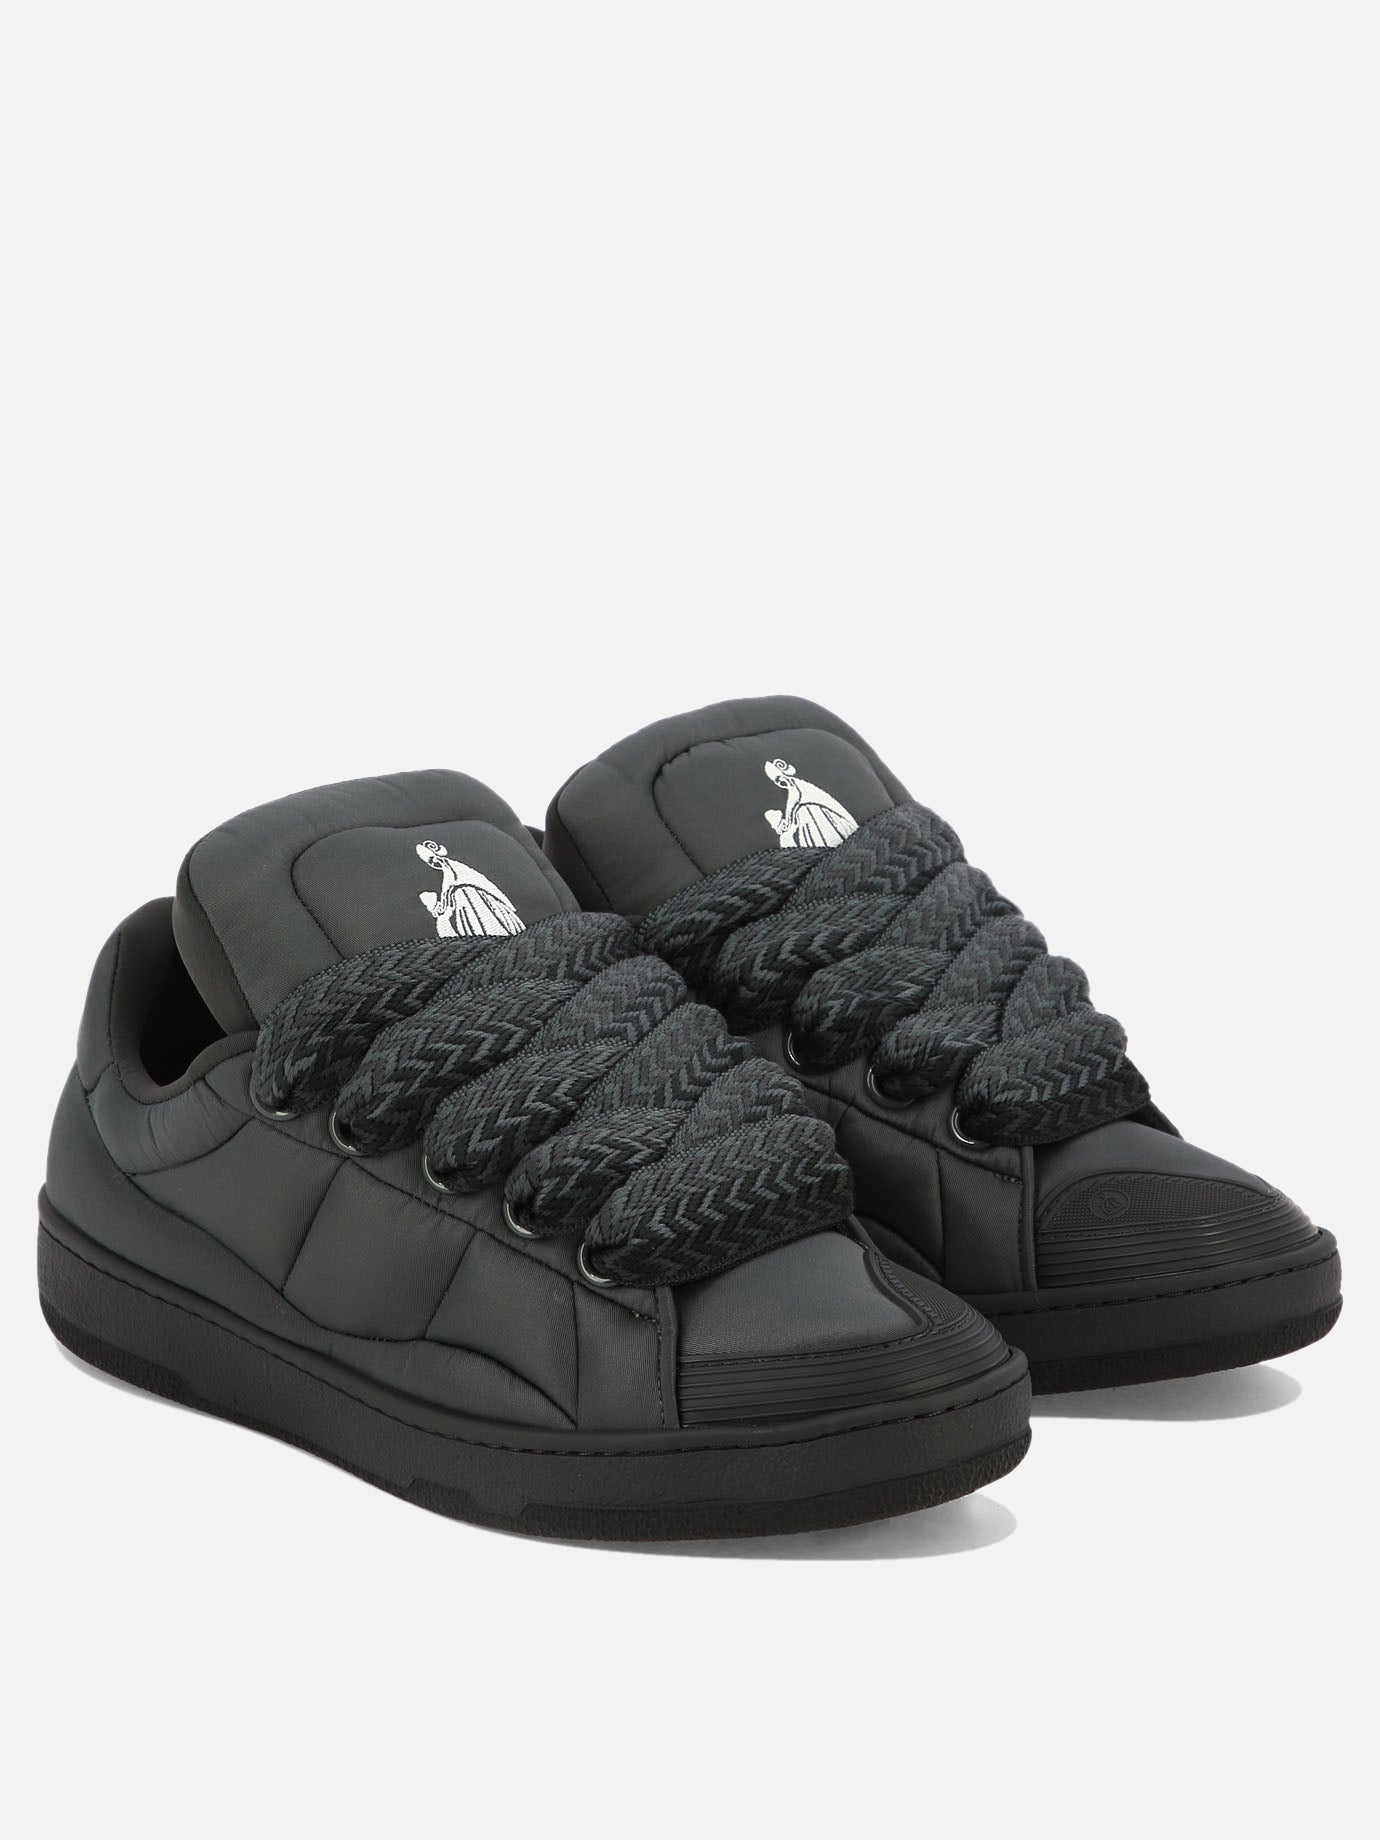 "Curb XL" sneakers